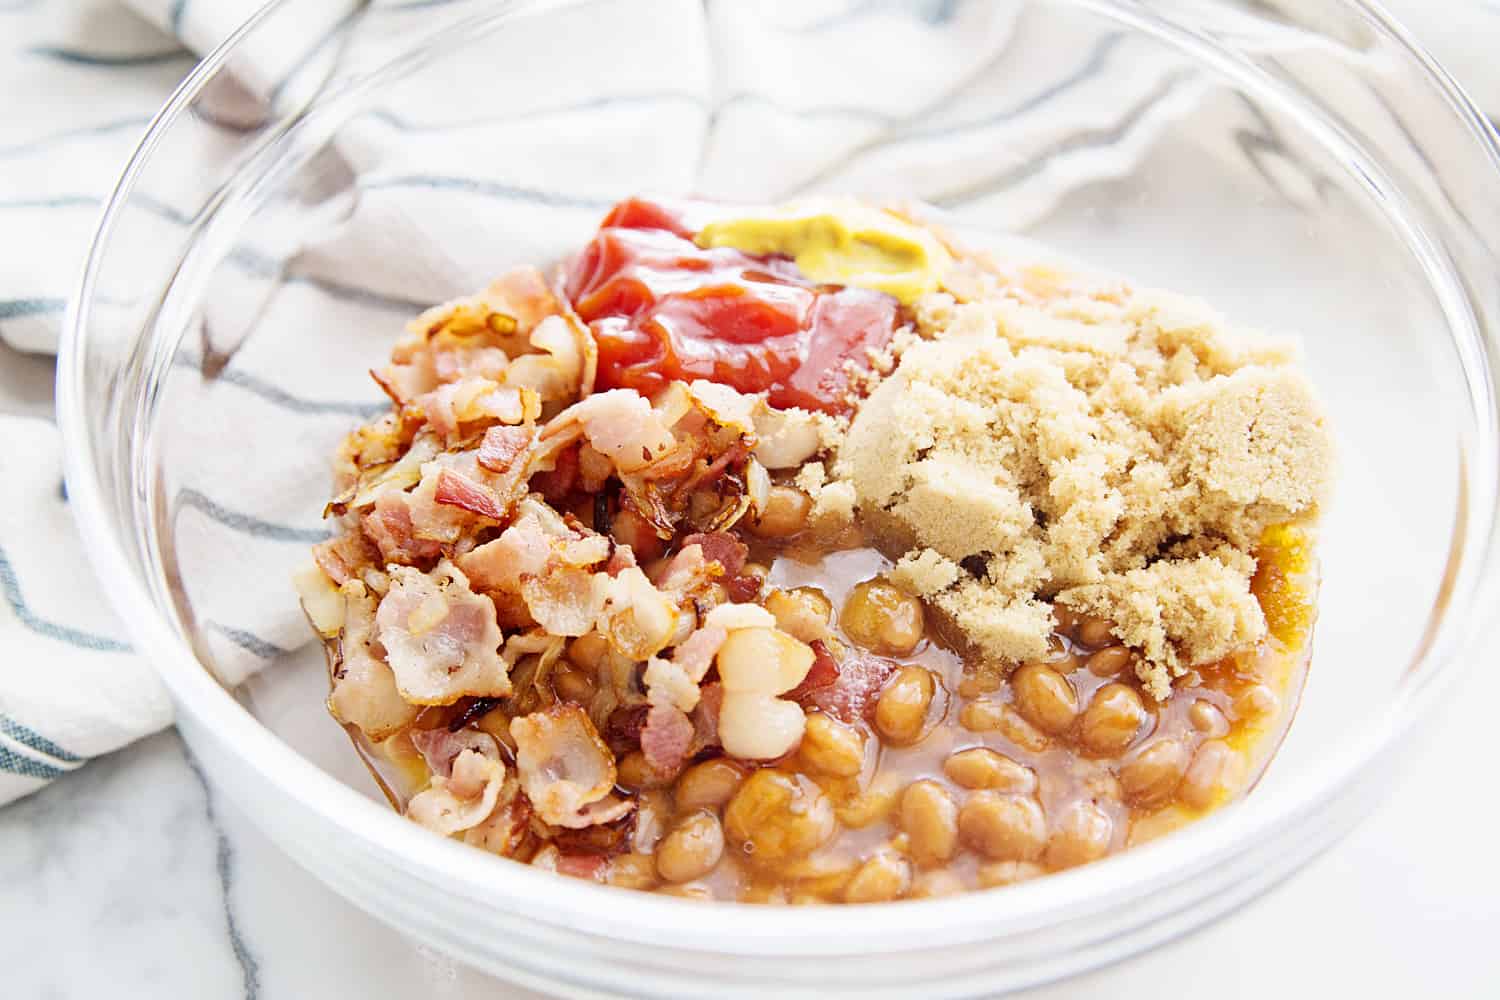 Homemade Baked Beans -- Looking for the best homemade baked beans recipe? This is it! A handful of ingredients plus a half hour in the oven equals the yummiest, most crowd-pleasing baked beans from scratch! #halfscratched #bakedbeans #beans #sidedish #savory #bacon #lentils #easyrecipe